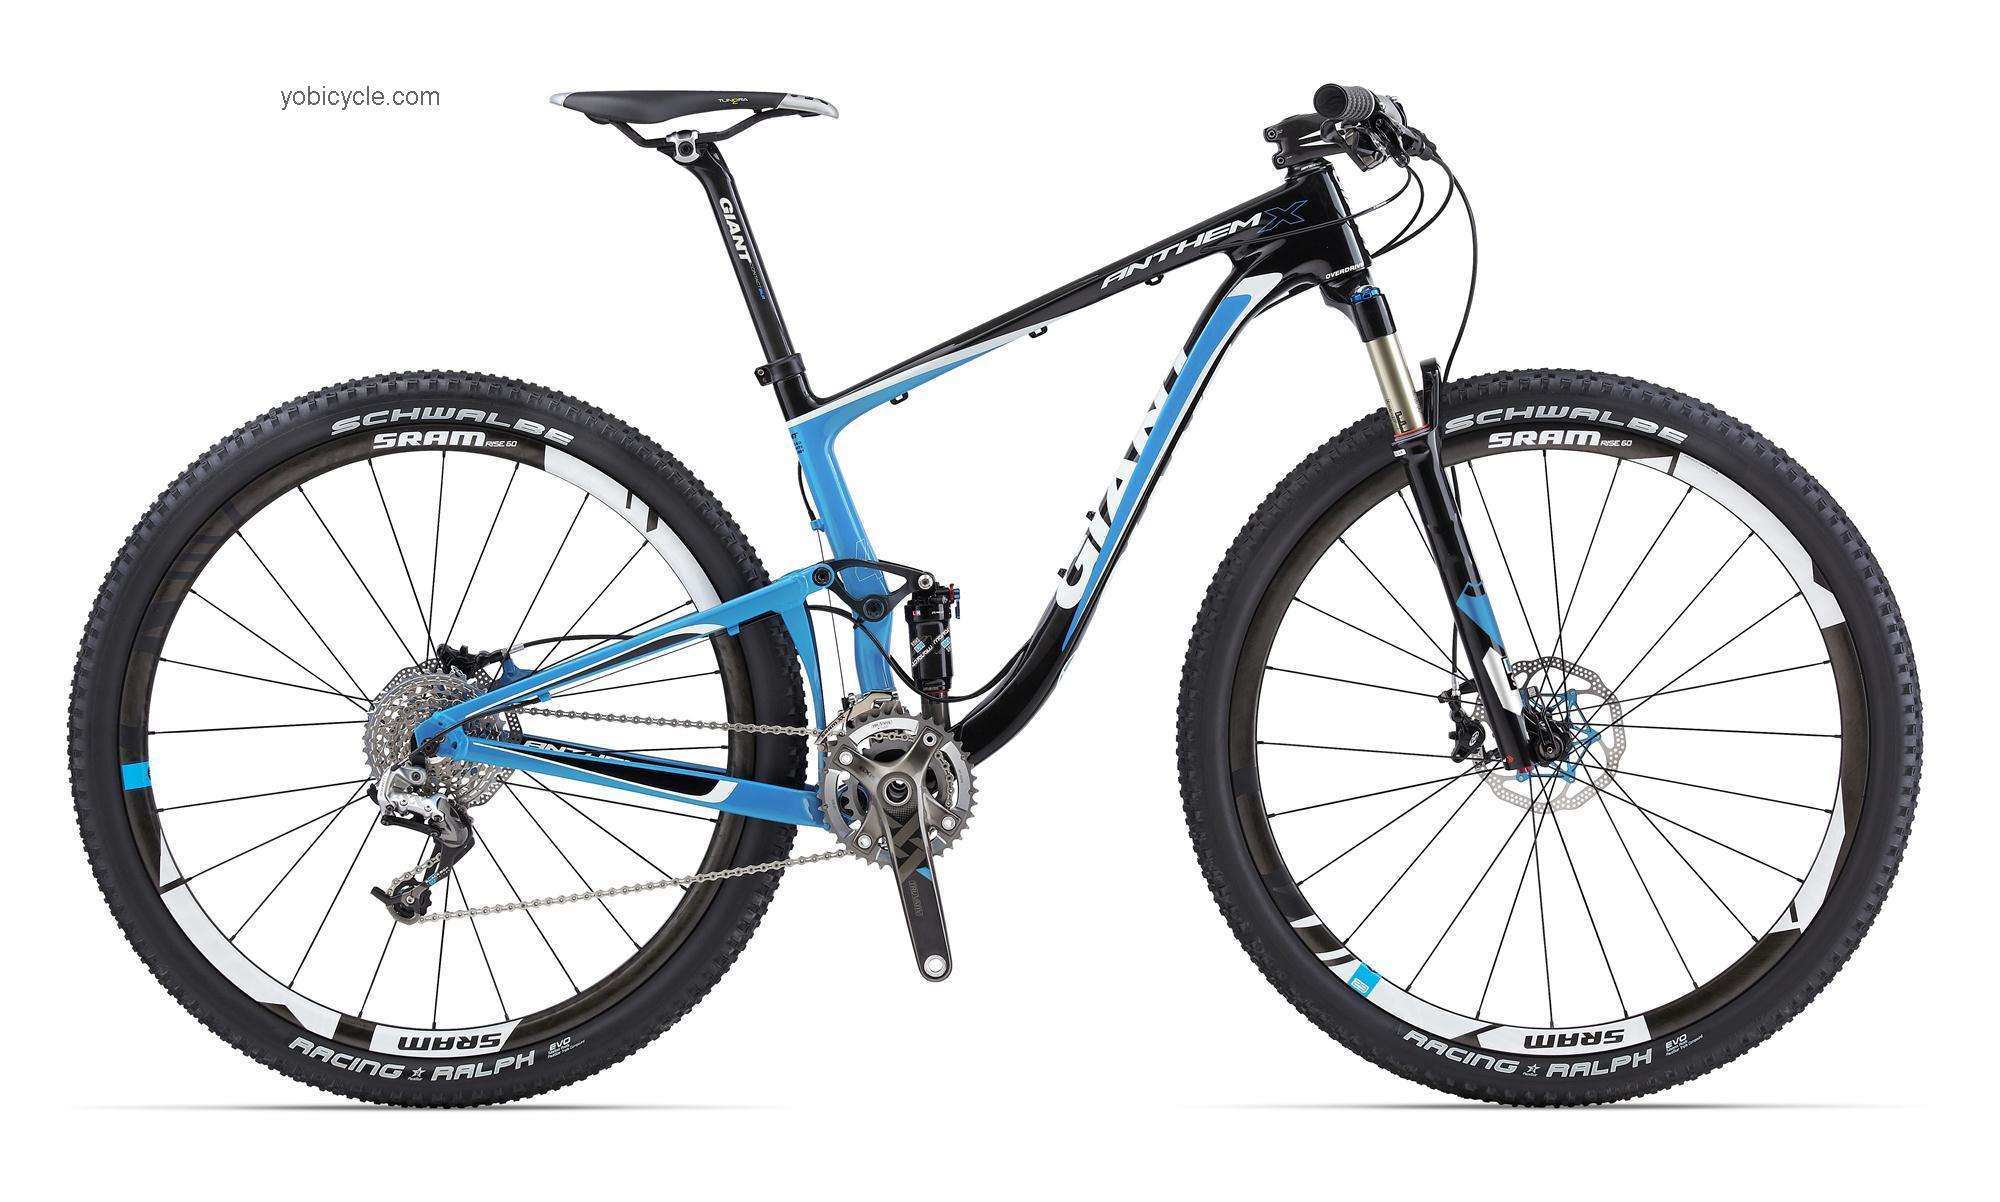 Giant Anthem X Advanced 29er 0 2013 comparison online with competitors